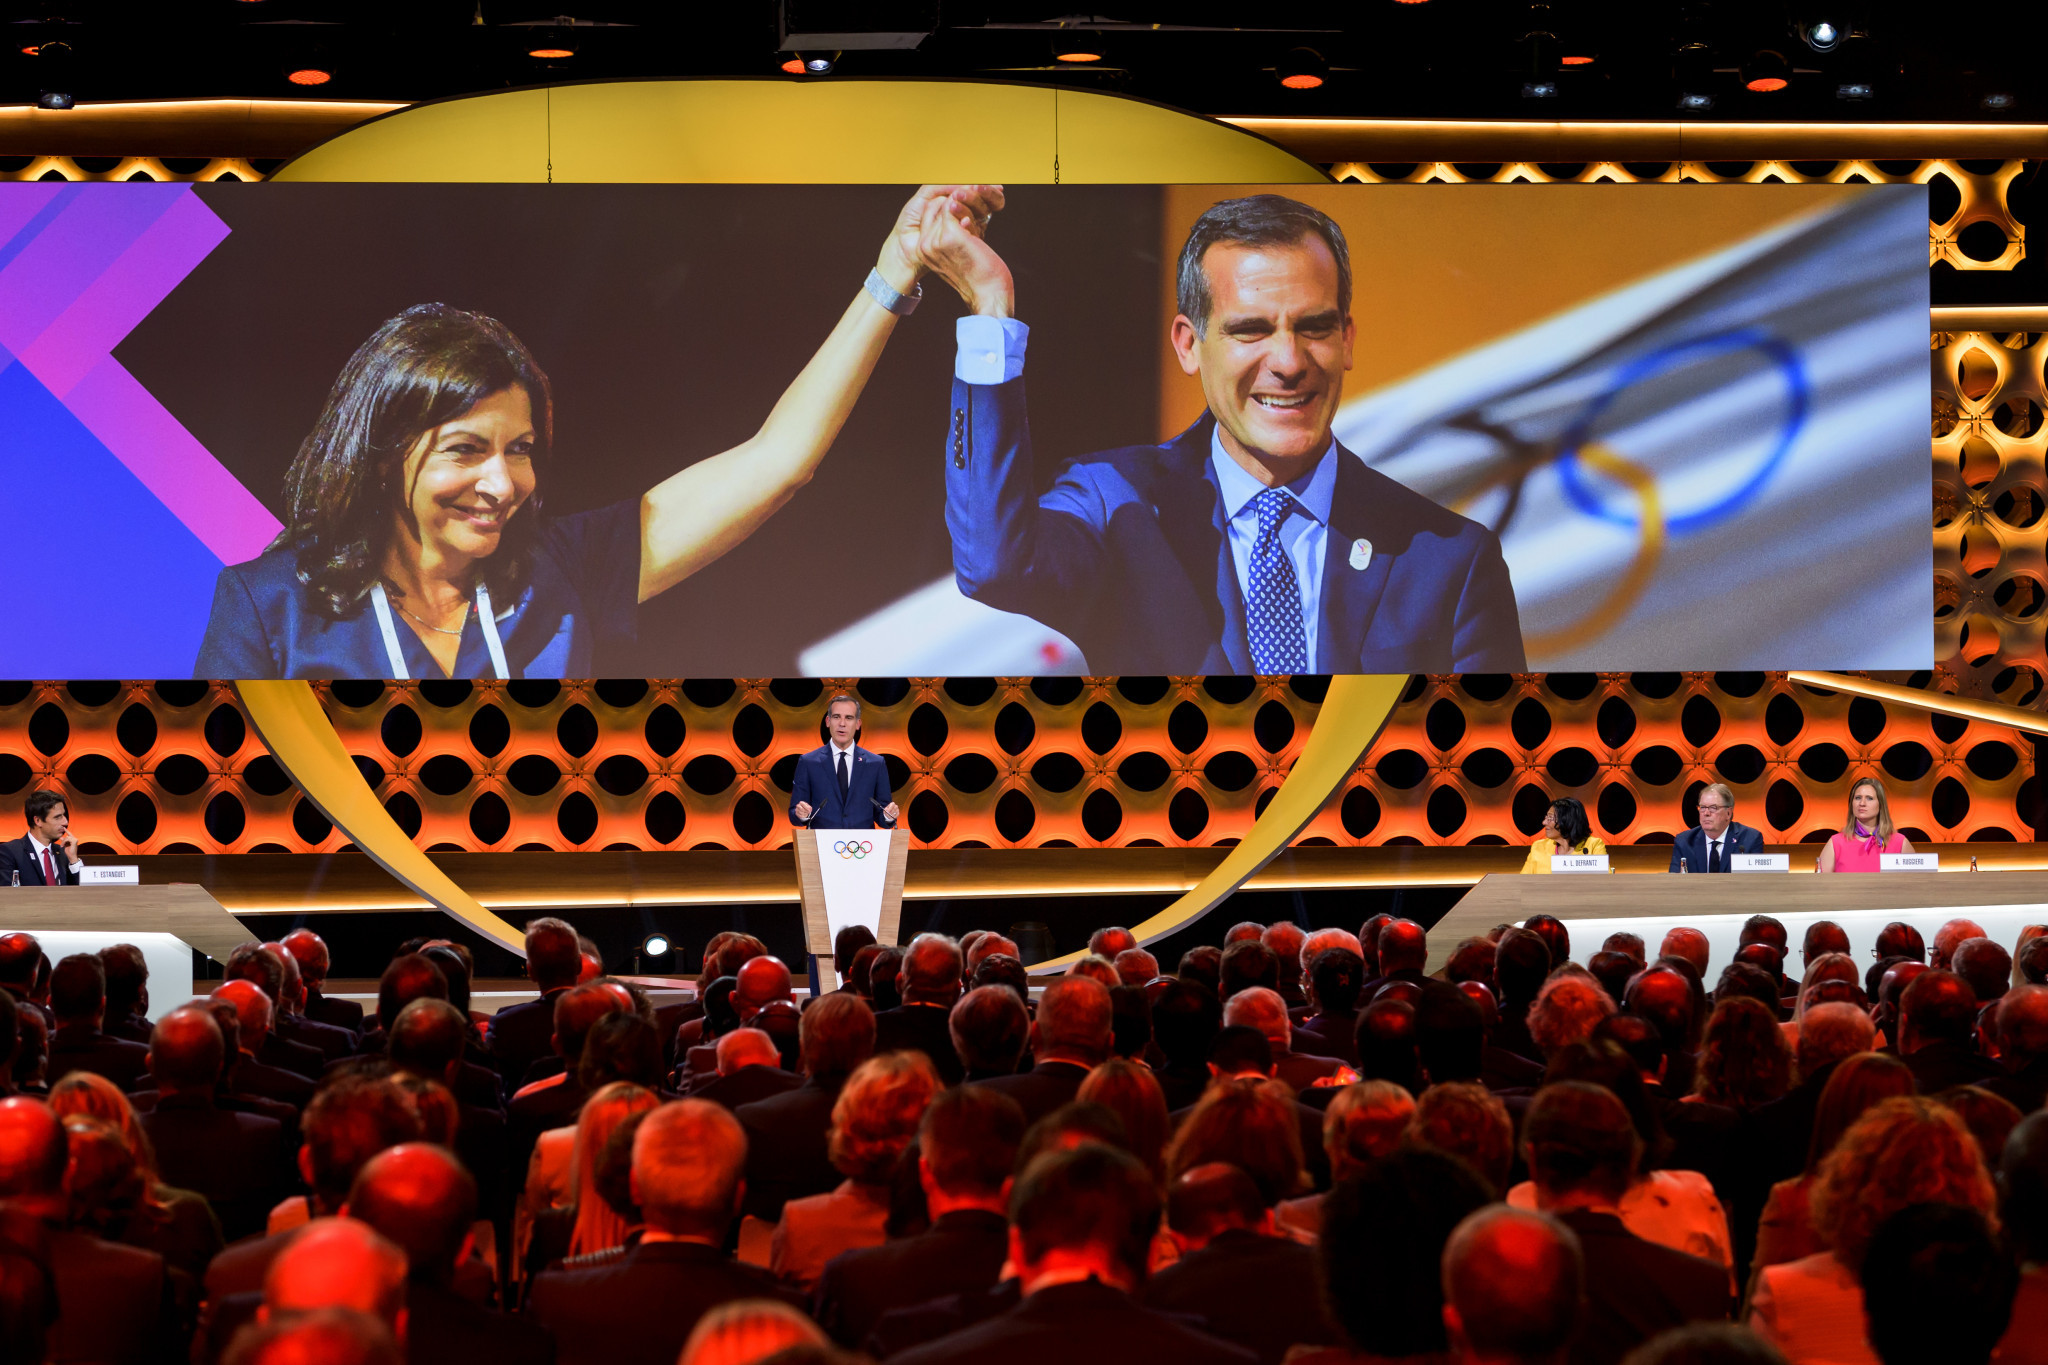 Eric Garcetti, speaking, made the Olympics sound like something a city should invest in ©Getty Images